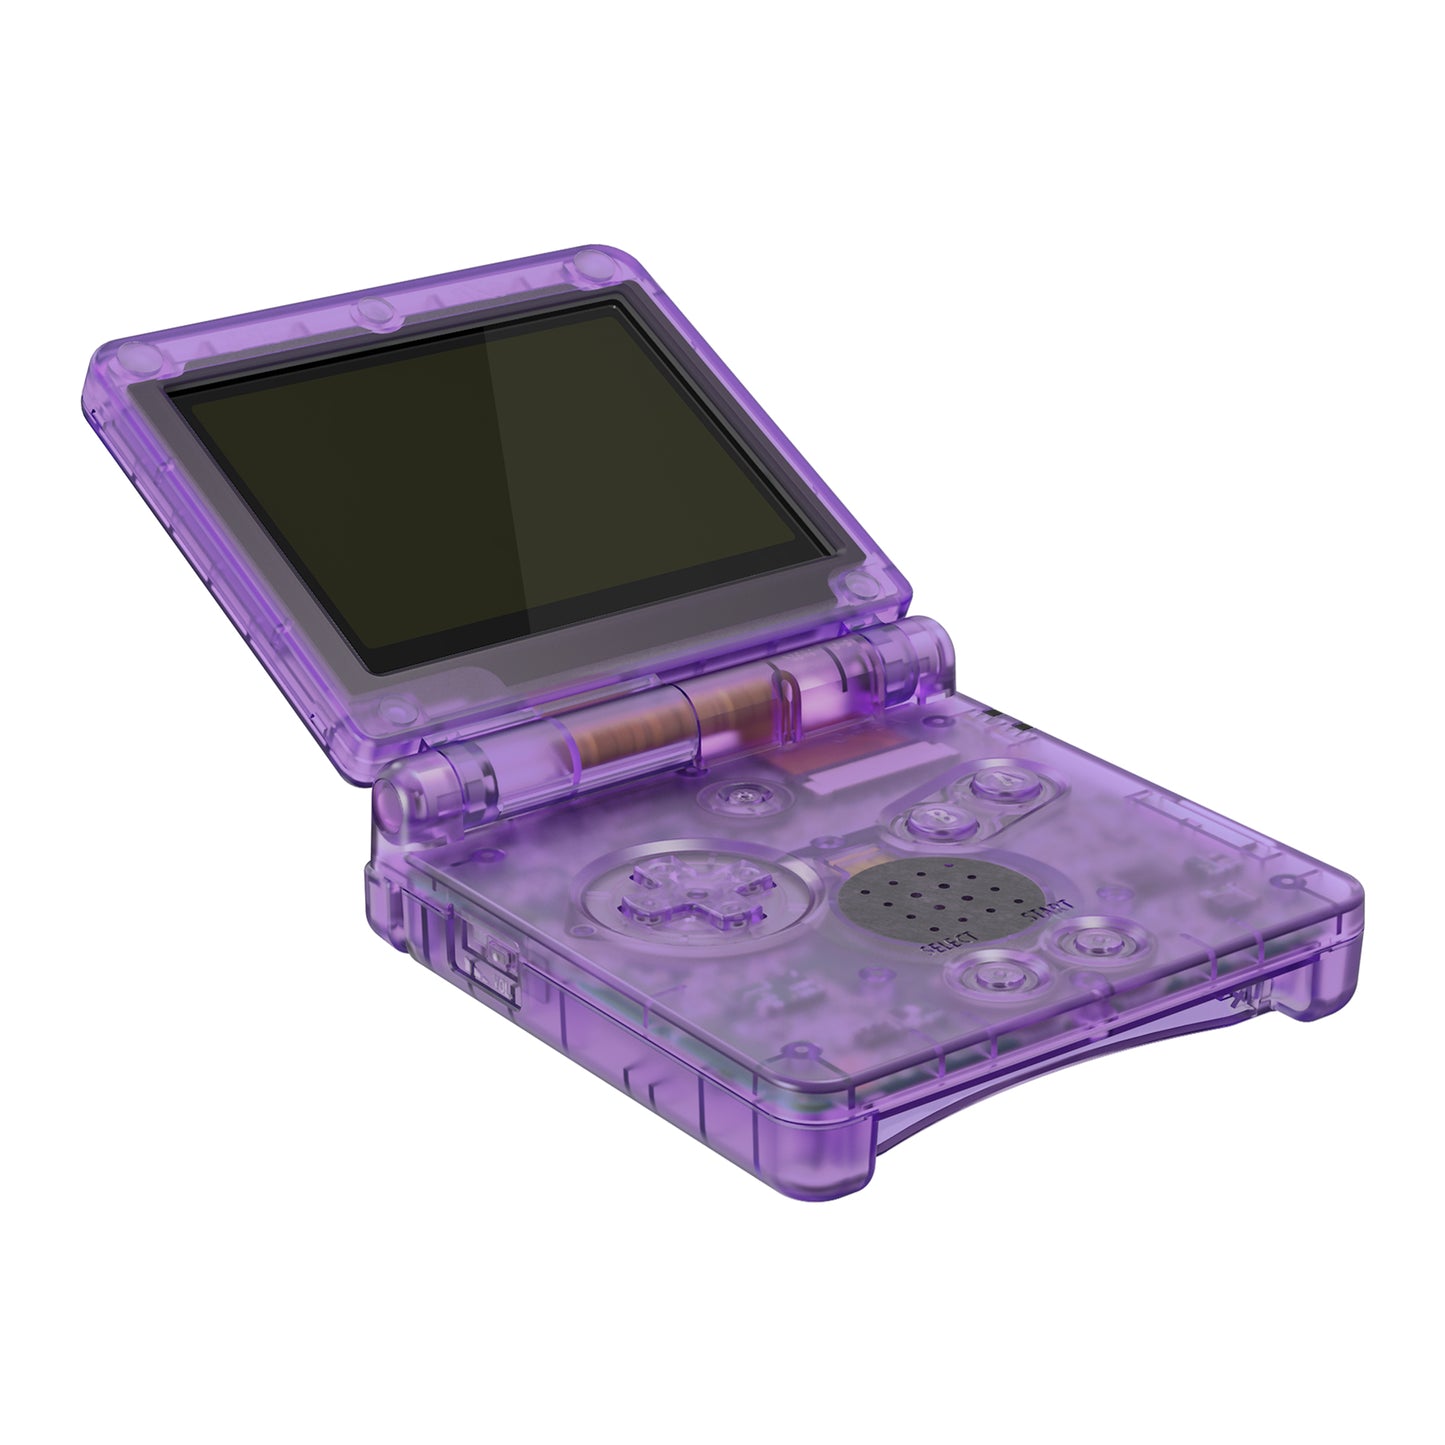 eXtremeRate Retail IPS Ready Upgraded eXtremeRate Clear Atomic Purple Custom Replacement Housing Shell for Gameboy Advance SP GBA SP – Compatible with Both IPS & Standard LCD – Console & Screen NOT Included - ASPM5005